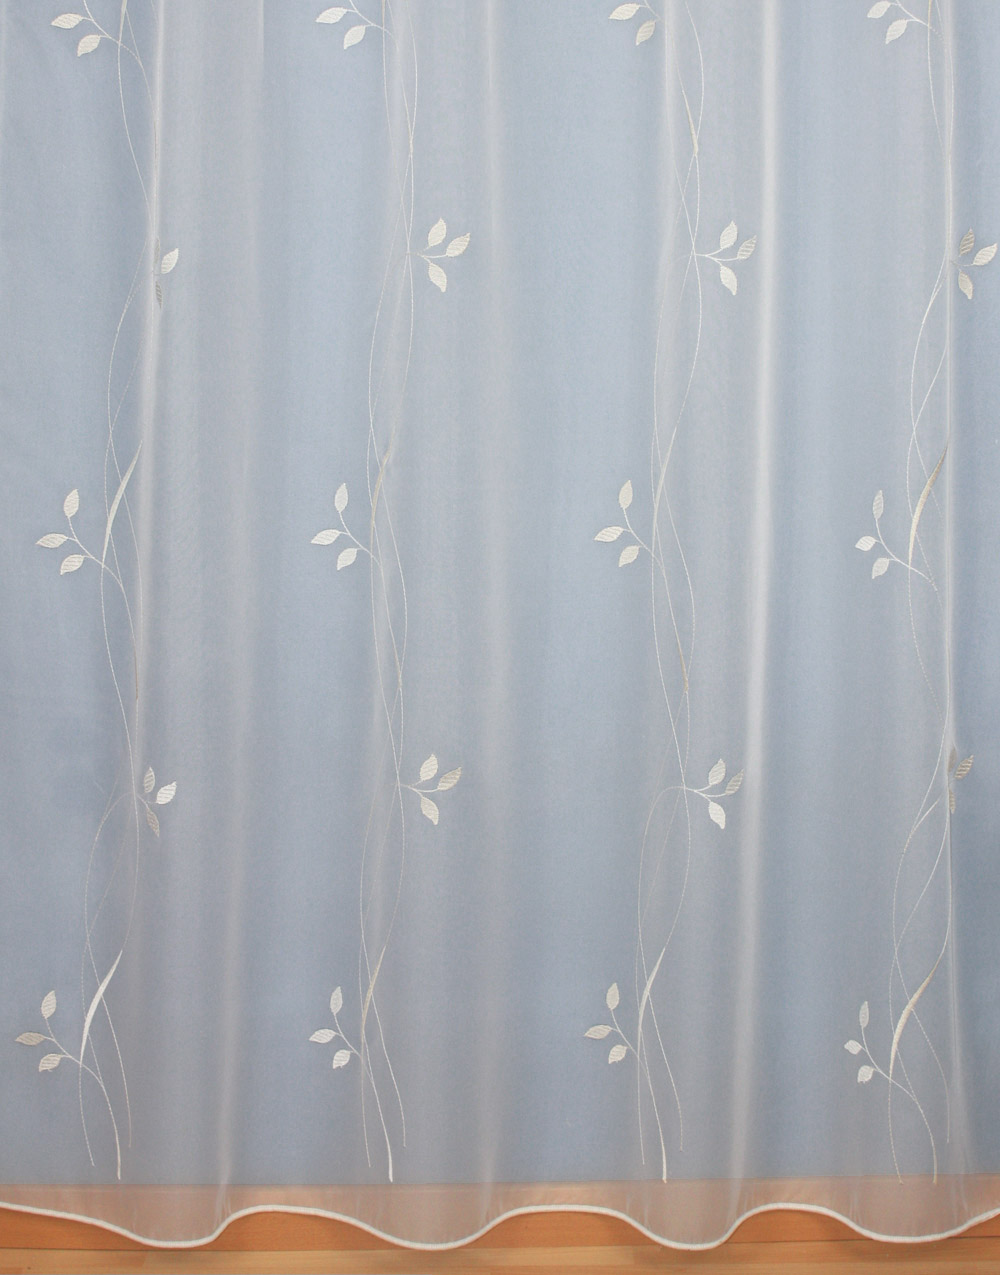 Sheer curtain with ecru embroidery